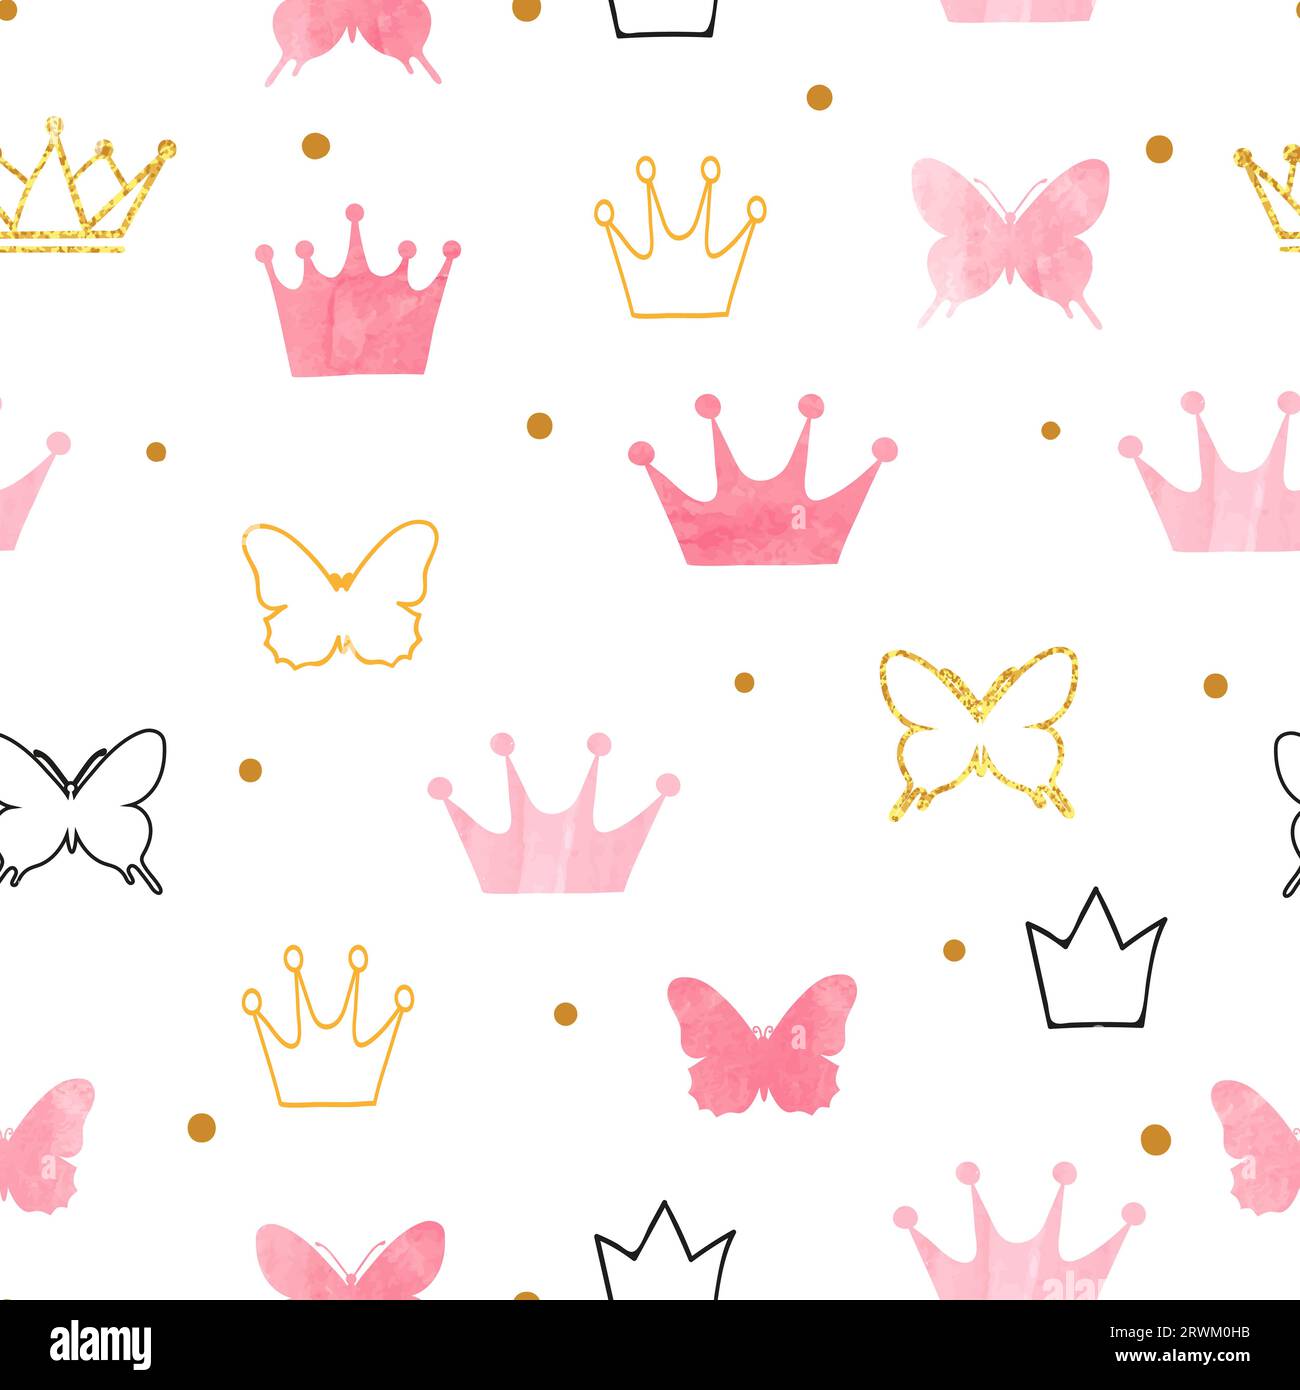 Little princess pattern with pink crowns and butterflies. Seamless vector illustration. Stock Vector